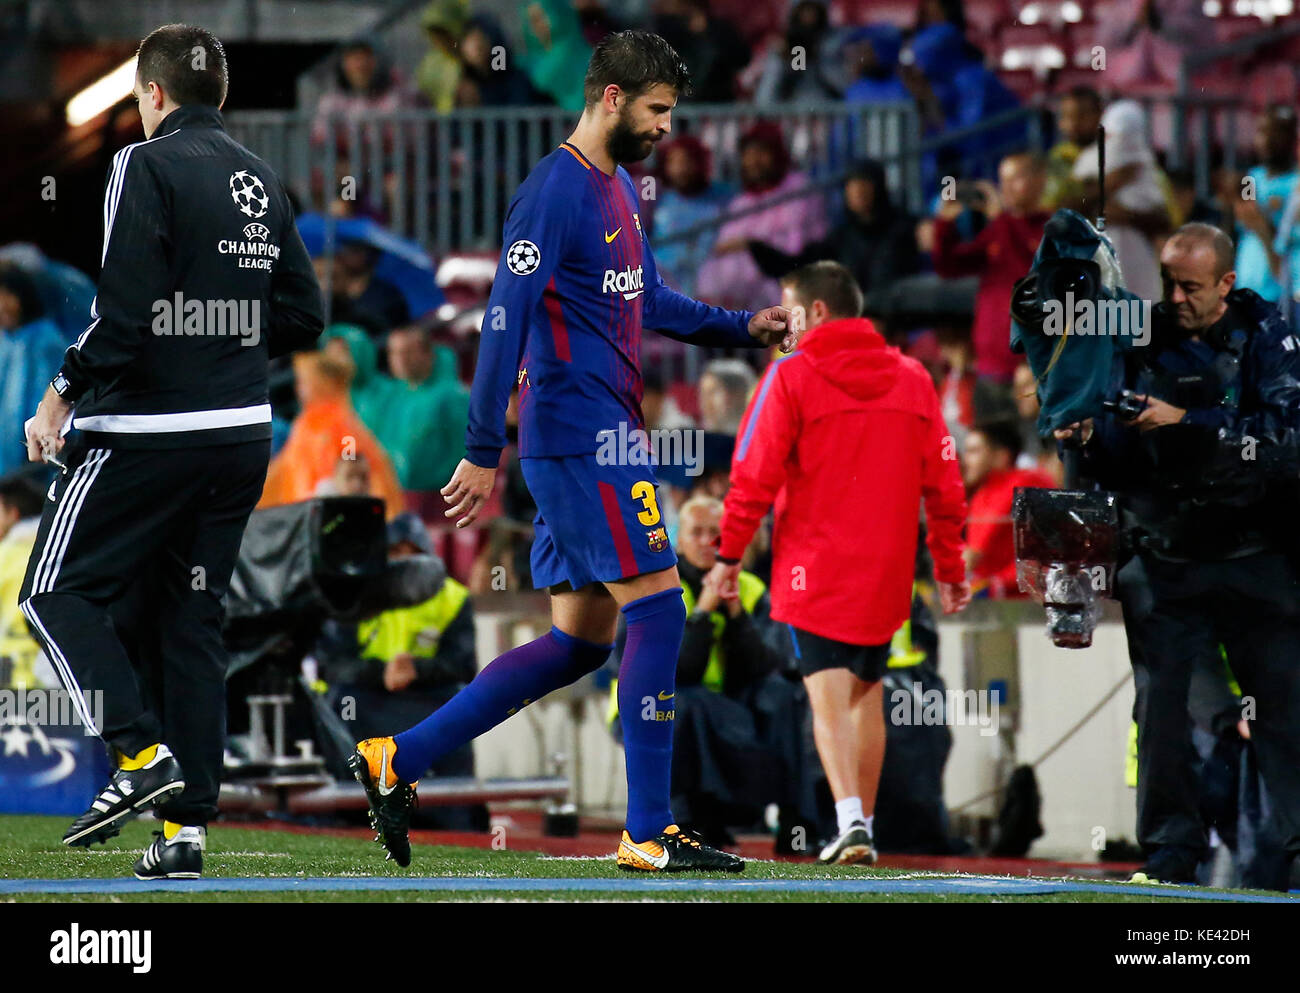 Barcelona, Spain. 18th Oct, 2017. Gerard Pique is send off during the match between FC Barcelona v Olympiakos, corresponding to the Champions League, on october 18, 2017. Credit: Gtres Información más Comuniación on line, S.L./Alamy Live News Stock Photo